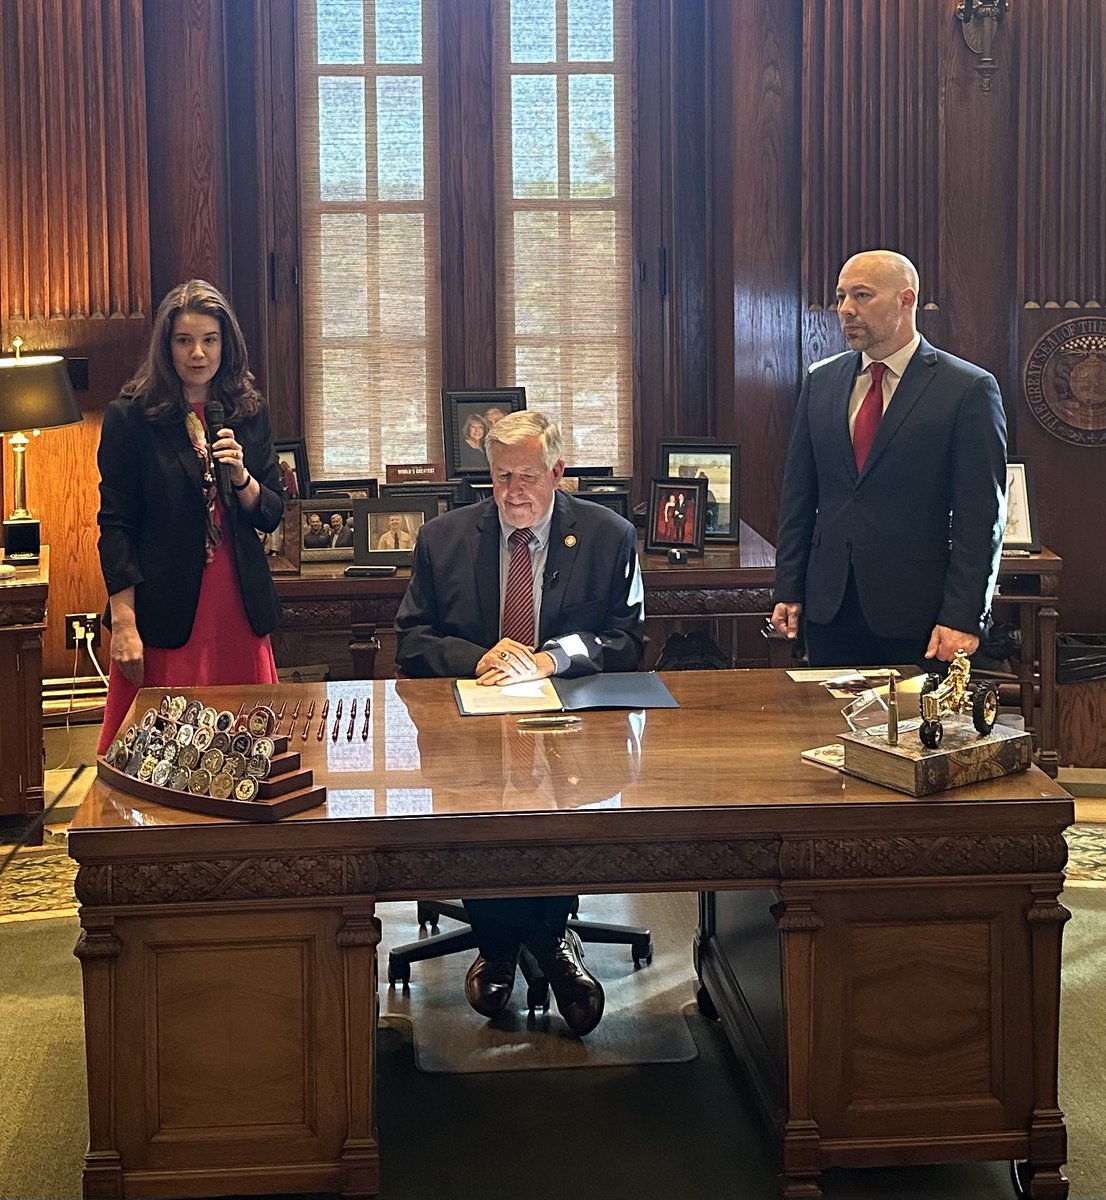 Missourians will no longer be forced to pay for abortions and abortion services with their tax dollars because we defunded Planned Parenthood. Proud to have championed this legislation in the Senate making it possible for @GovParsonMO to sign it today. #moleg @cody4mo